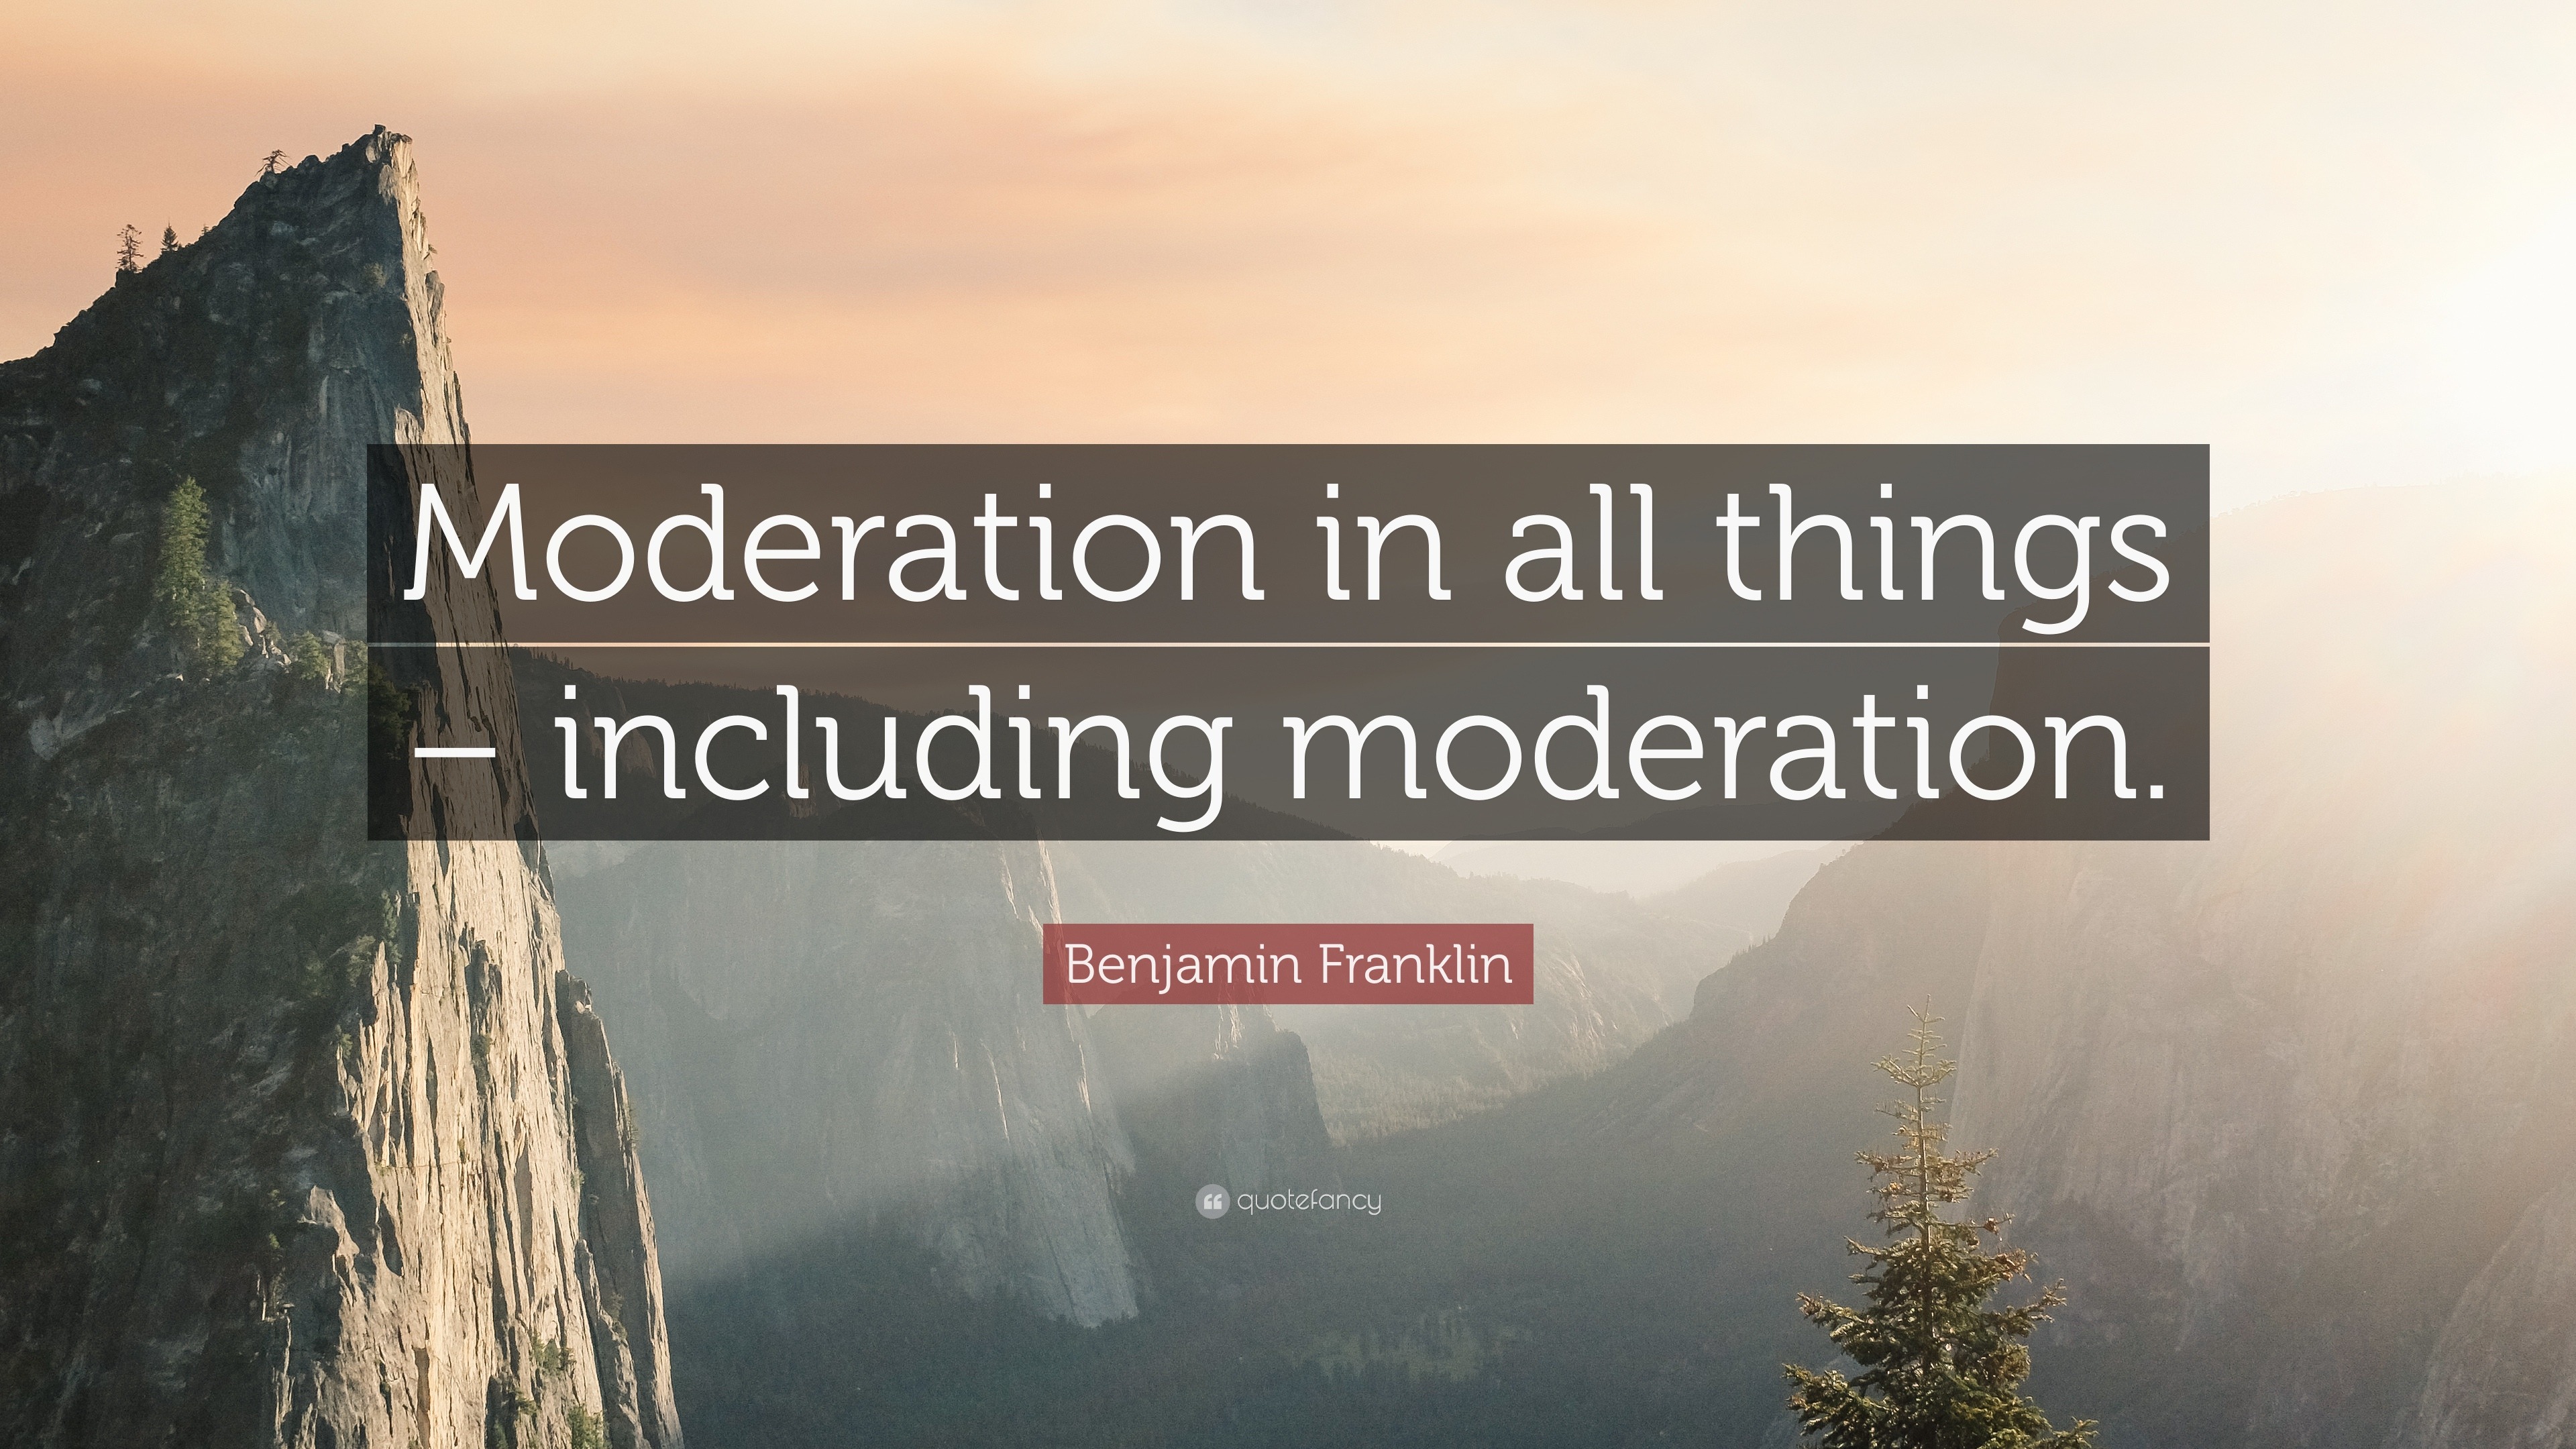 446600-Benjamin-Franklin-Quote-Moderation-in-all-things-including.jpg